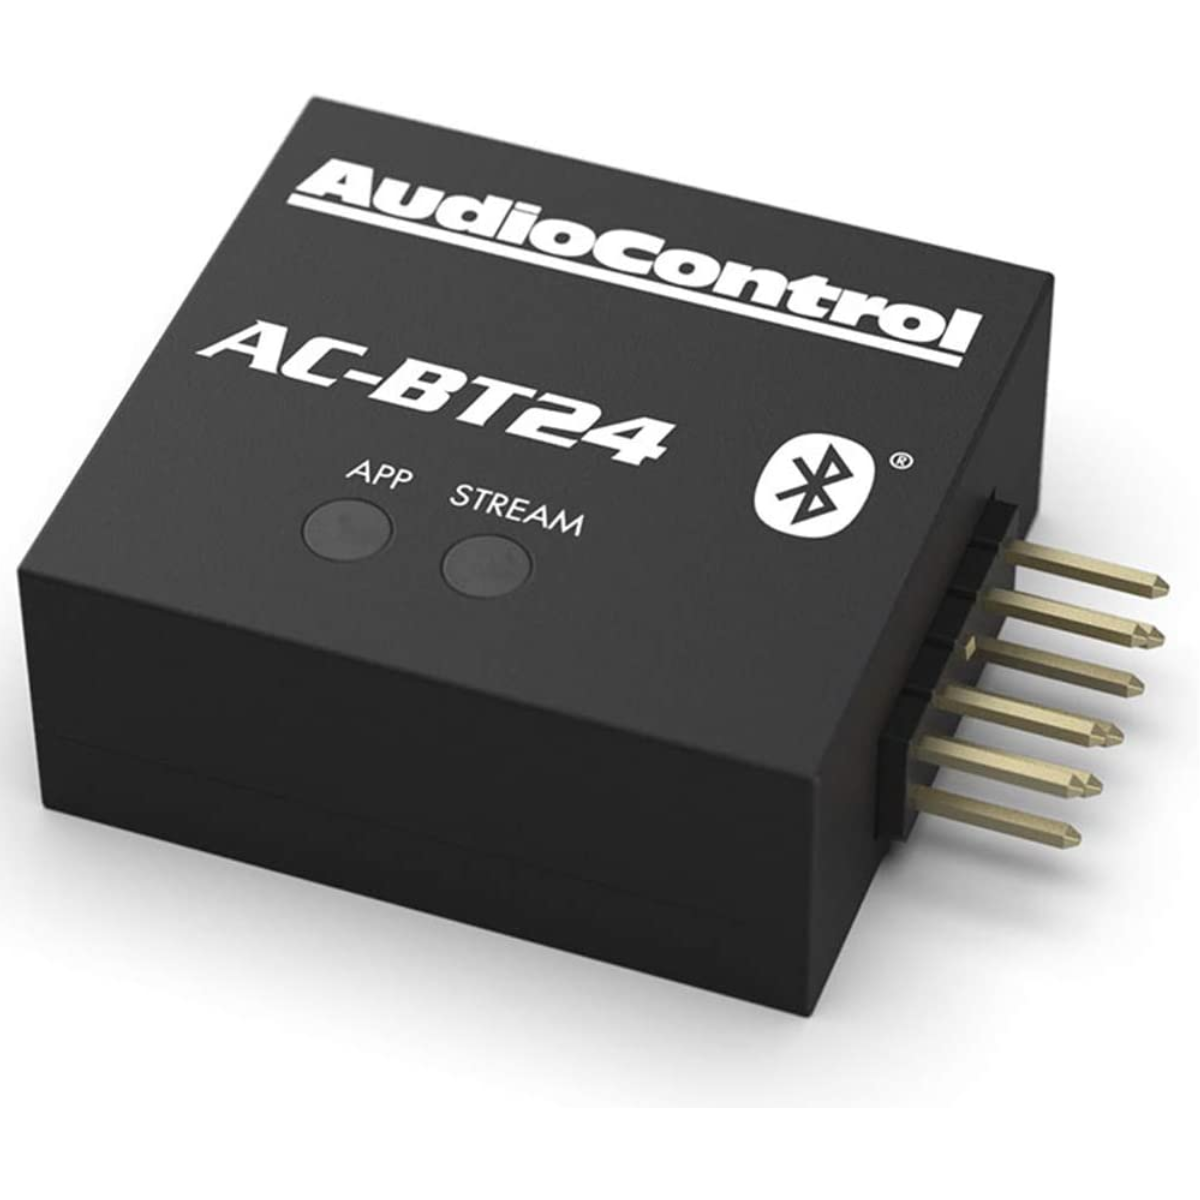 AC-BT24 Bluetooth Adapter for AudioControl DSP Products